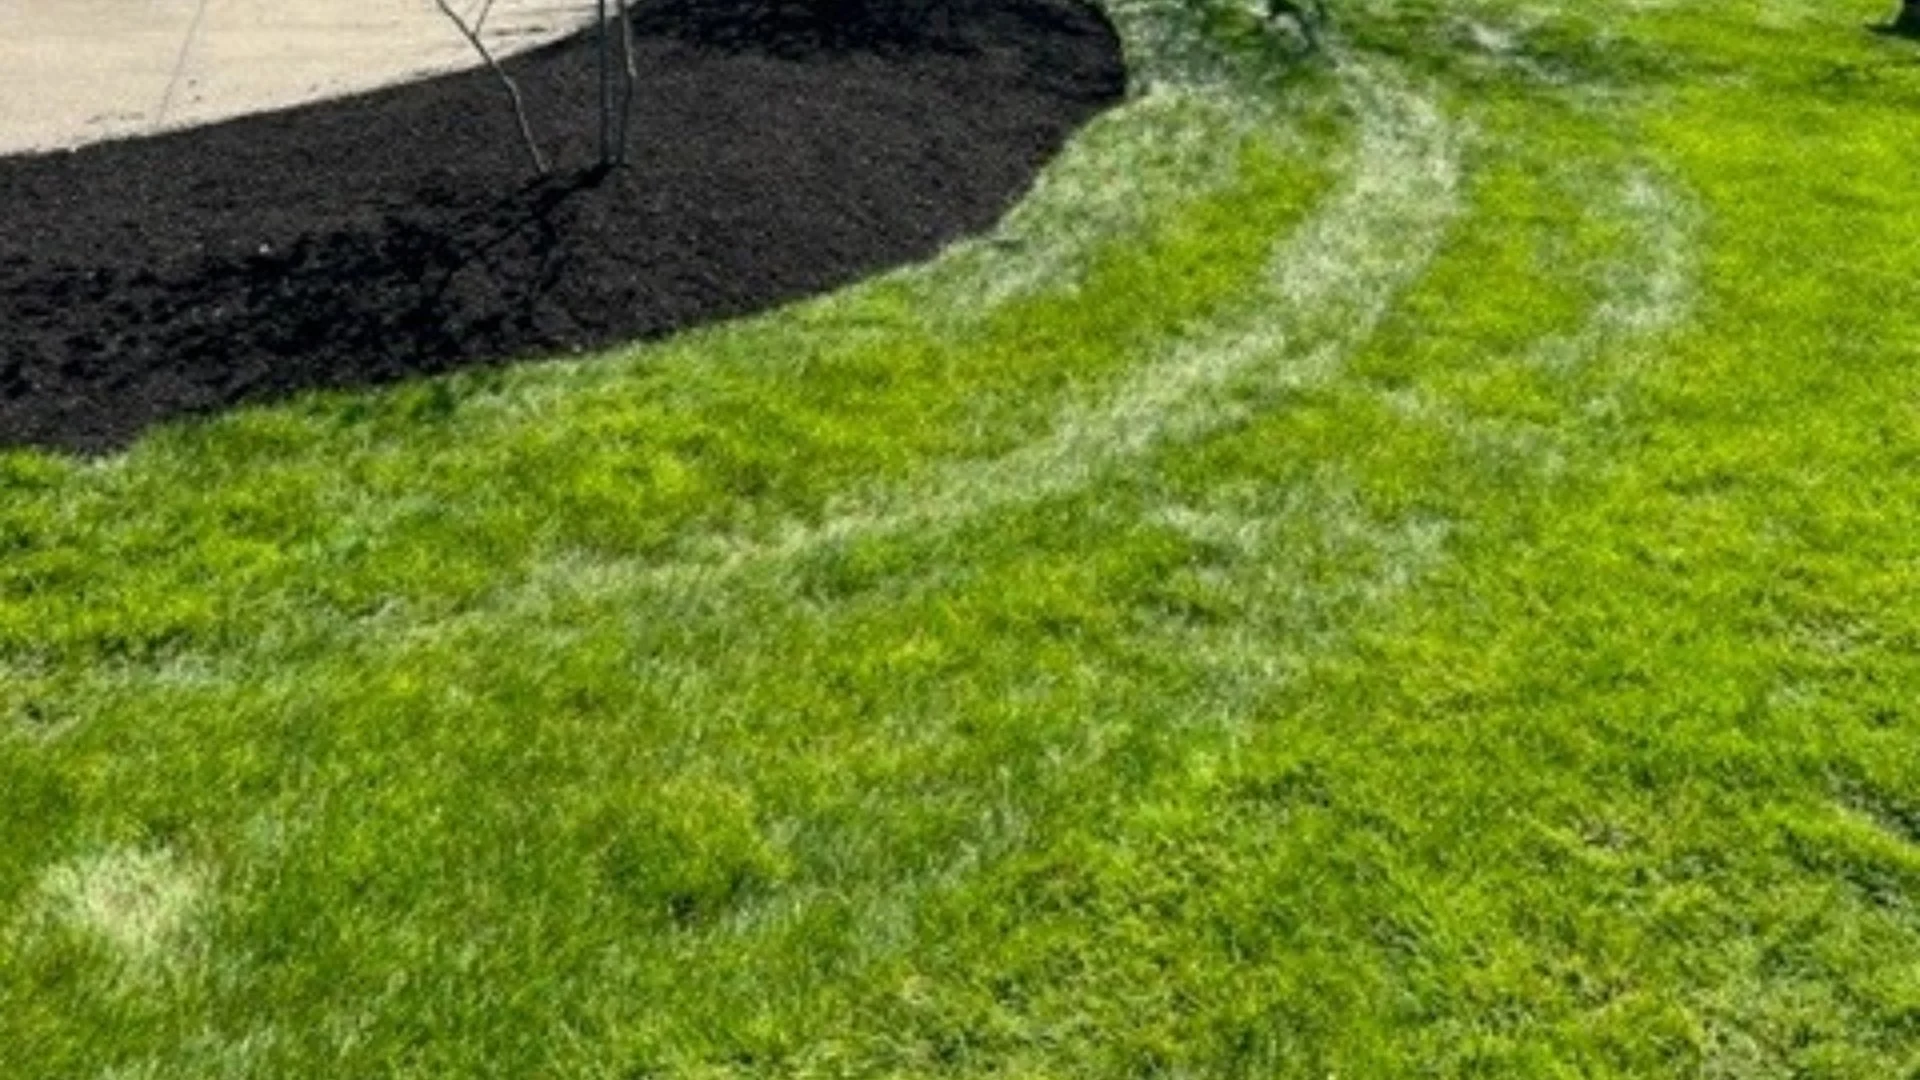 Pairing Aeration & Overseeding This Fall Will Help You Reach Your Dream Lawn!